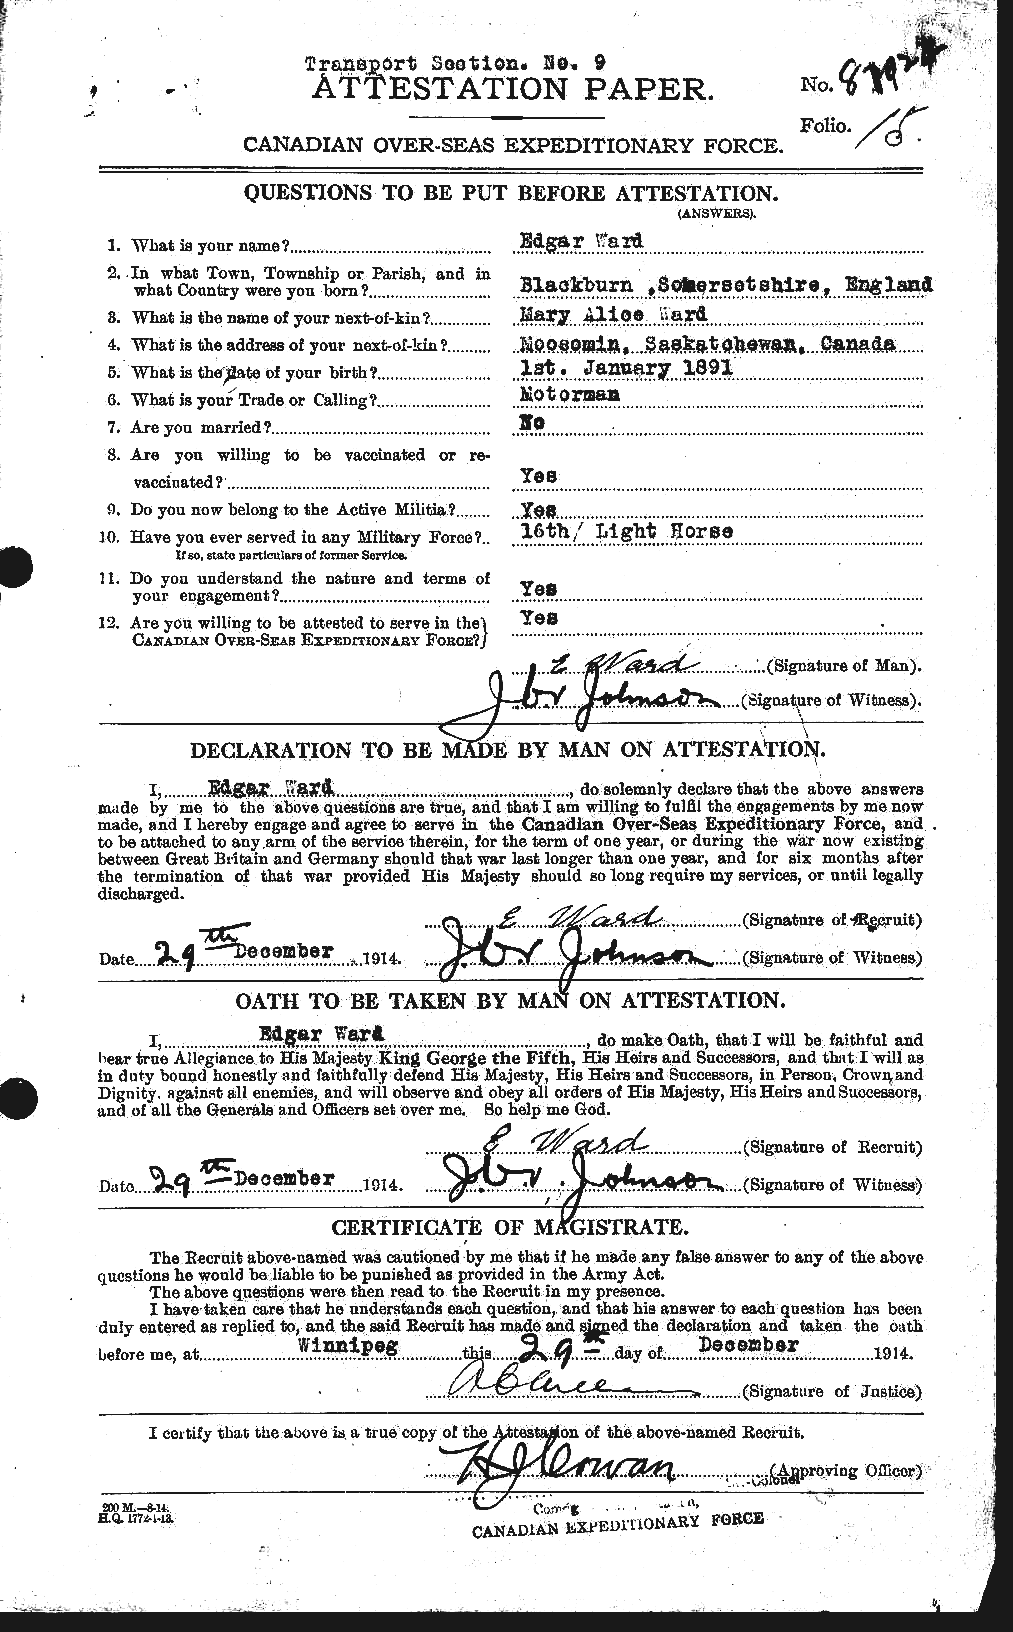 Personnel Records of the First World War - CEF 657635a